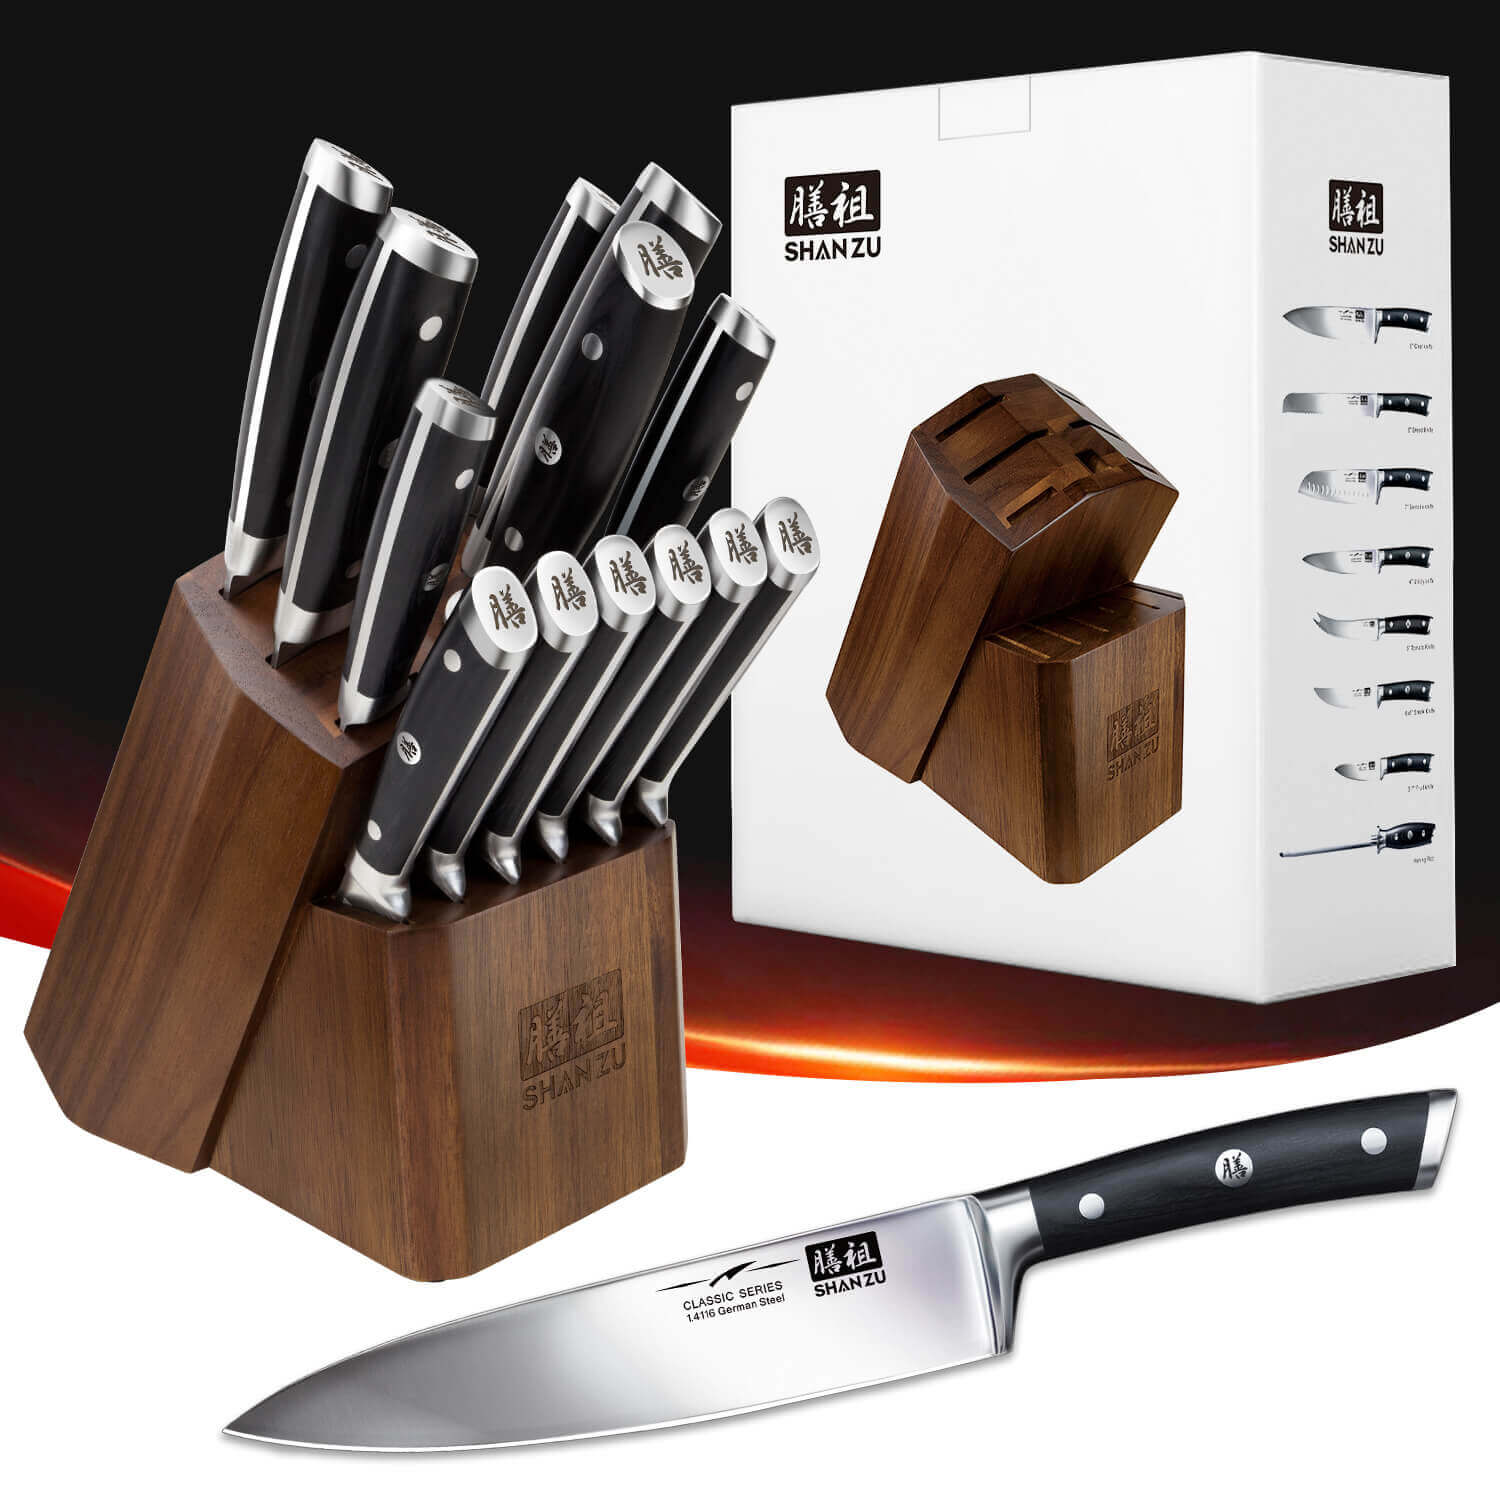  CF001 Knife Sets,14 Pieces German Stainless Steel Kitchen Knife  Block silver Sets,Years of knife-making Experience Durable and Strong Knife  Set, 14-Piece High Carbon Stainless Steel Kitchen Knife Hold: Home & Kitchen